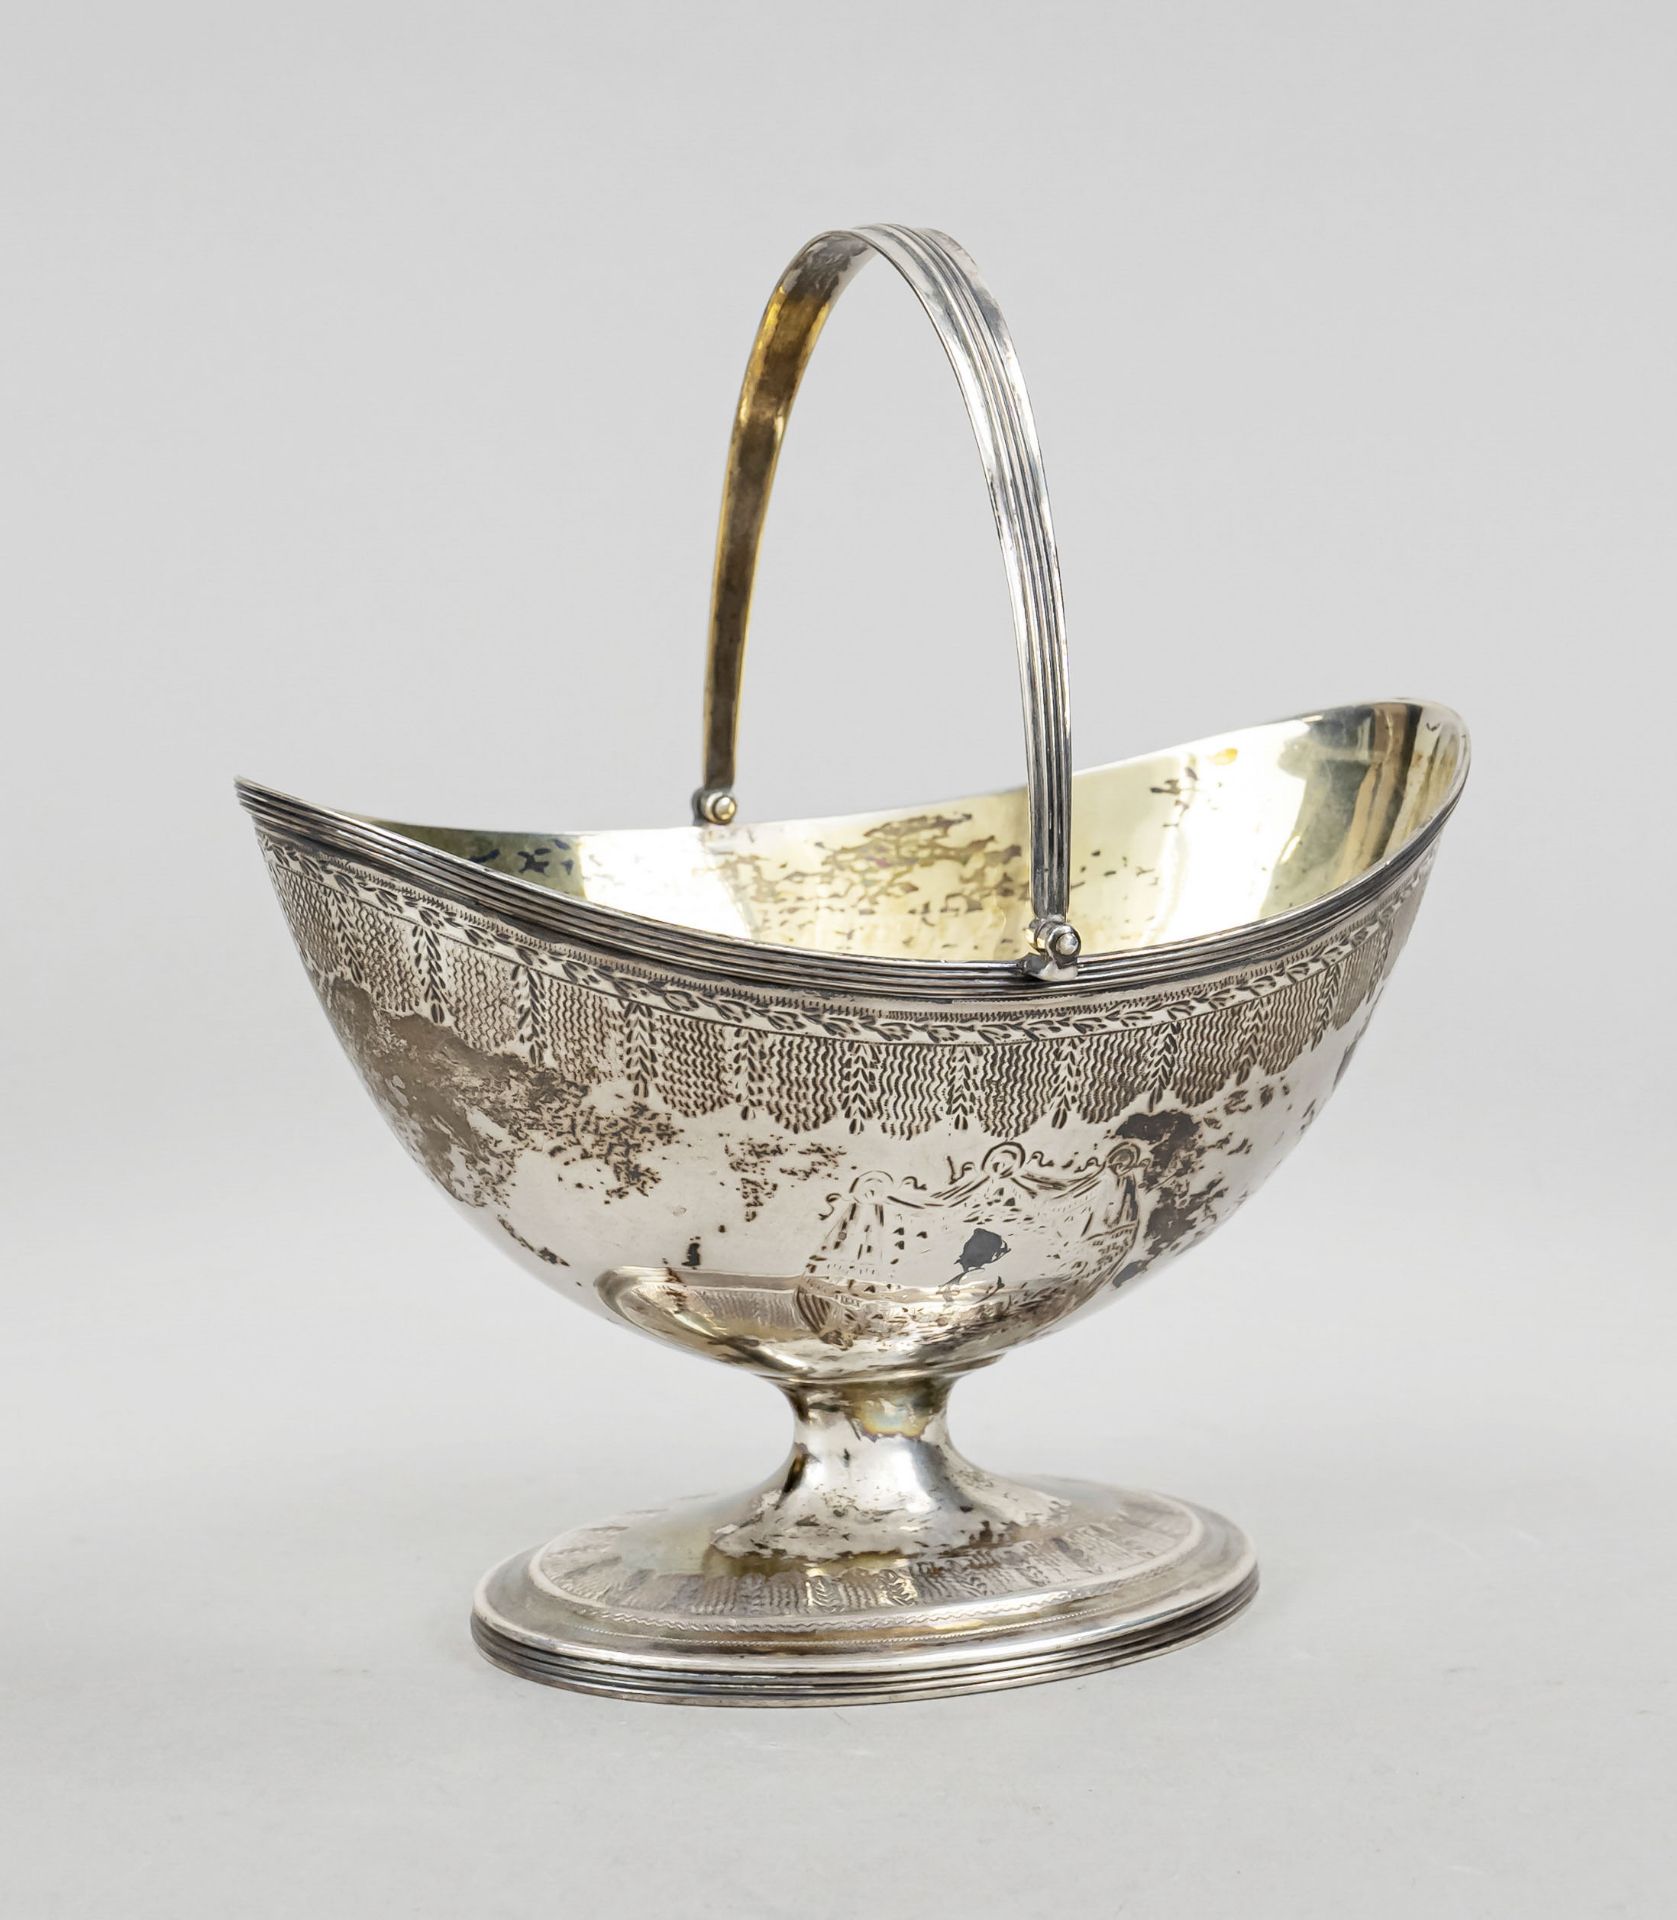 Oval footed bowl, England, 1796, maker's mark of John Langlands II, Newcastle, sterling silver 925/